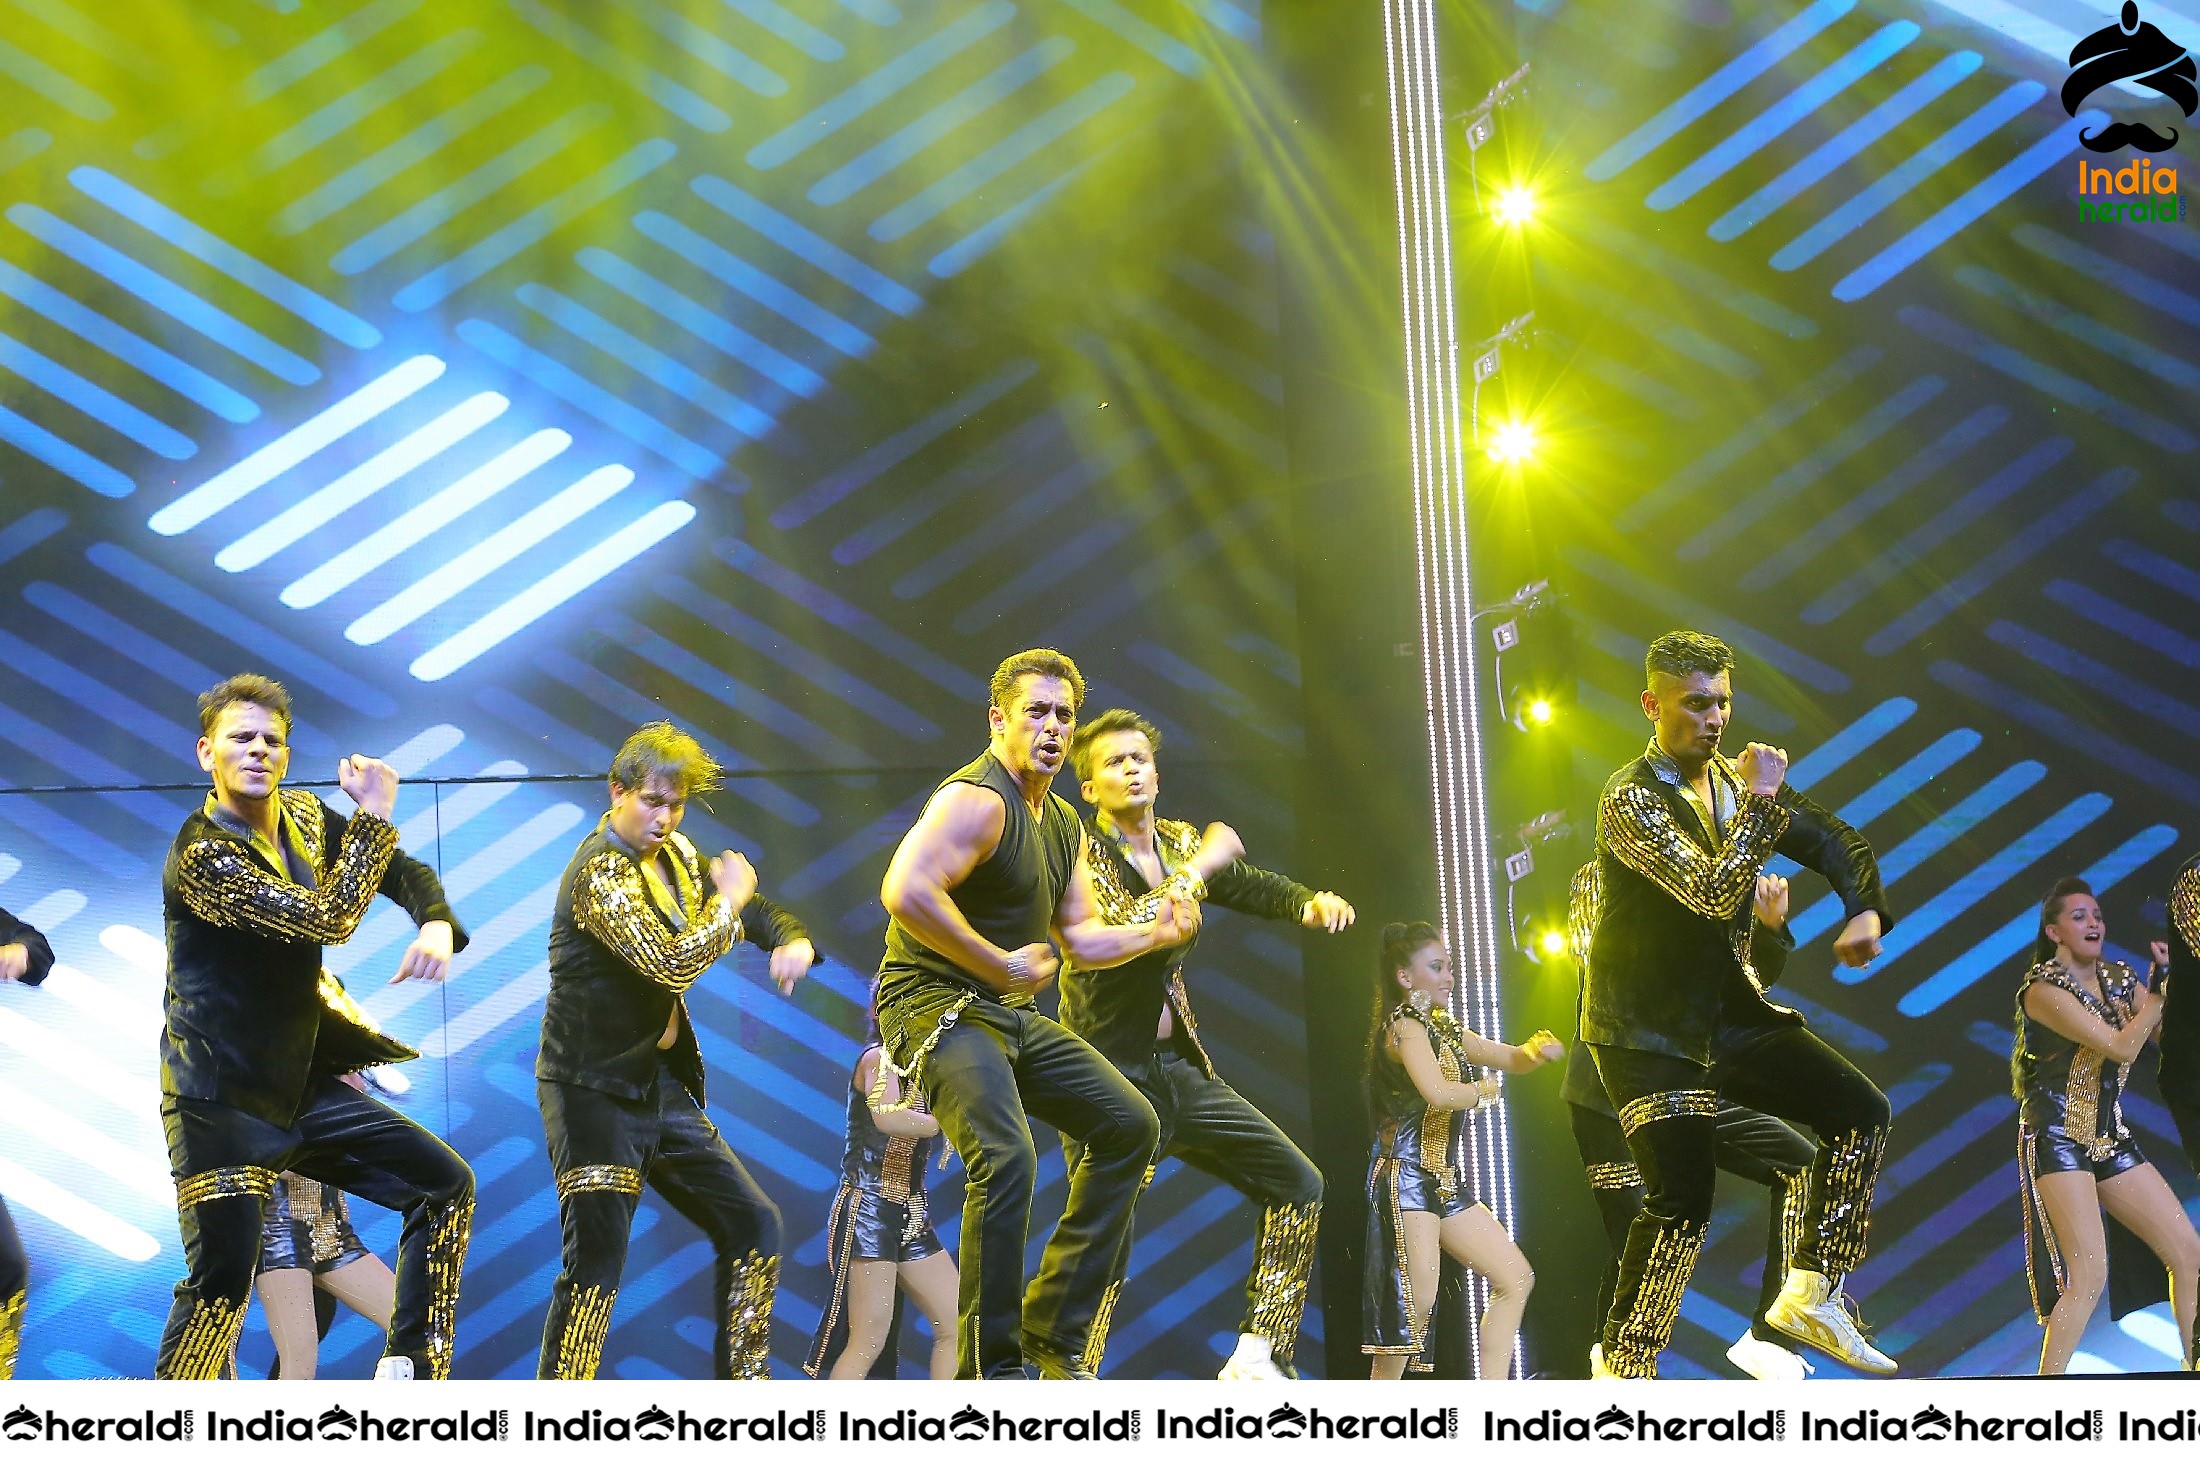 Power Packed performance by Salman Khan at Dabangg Tour in Hyderabad Set 2